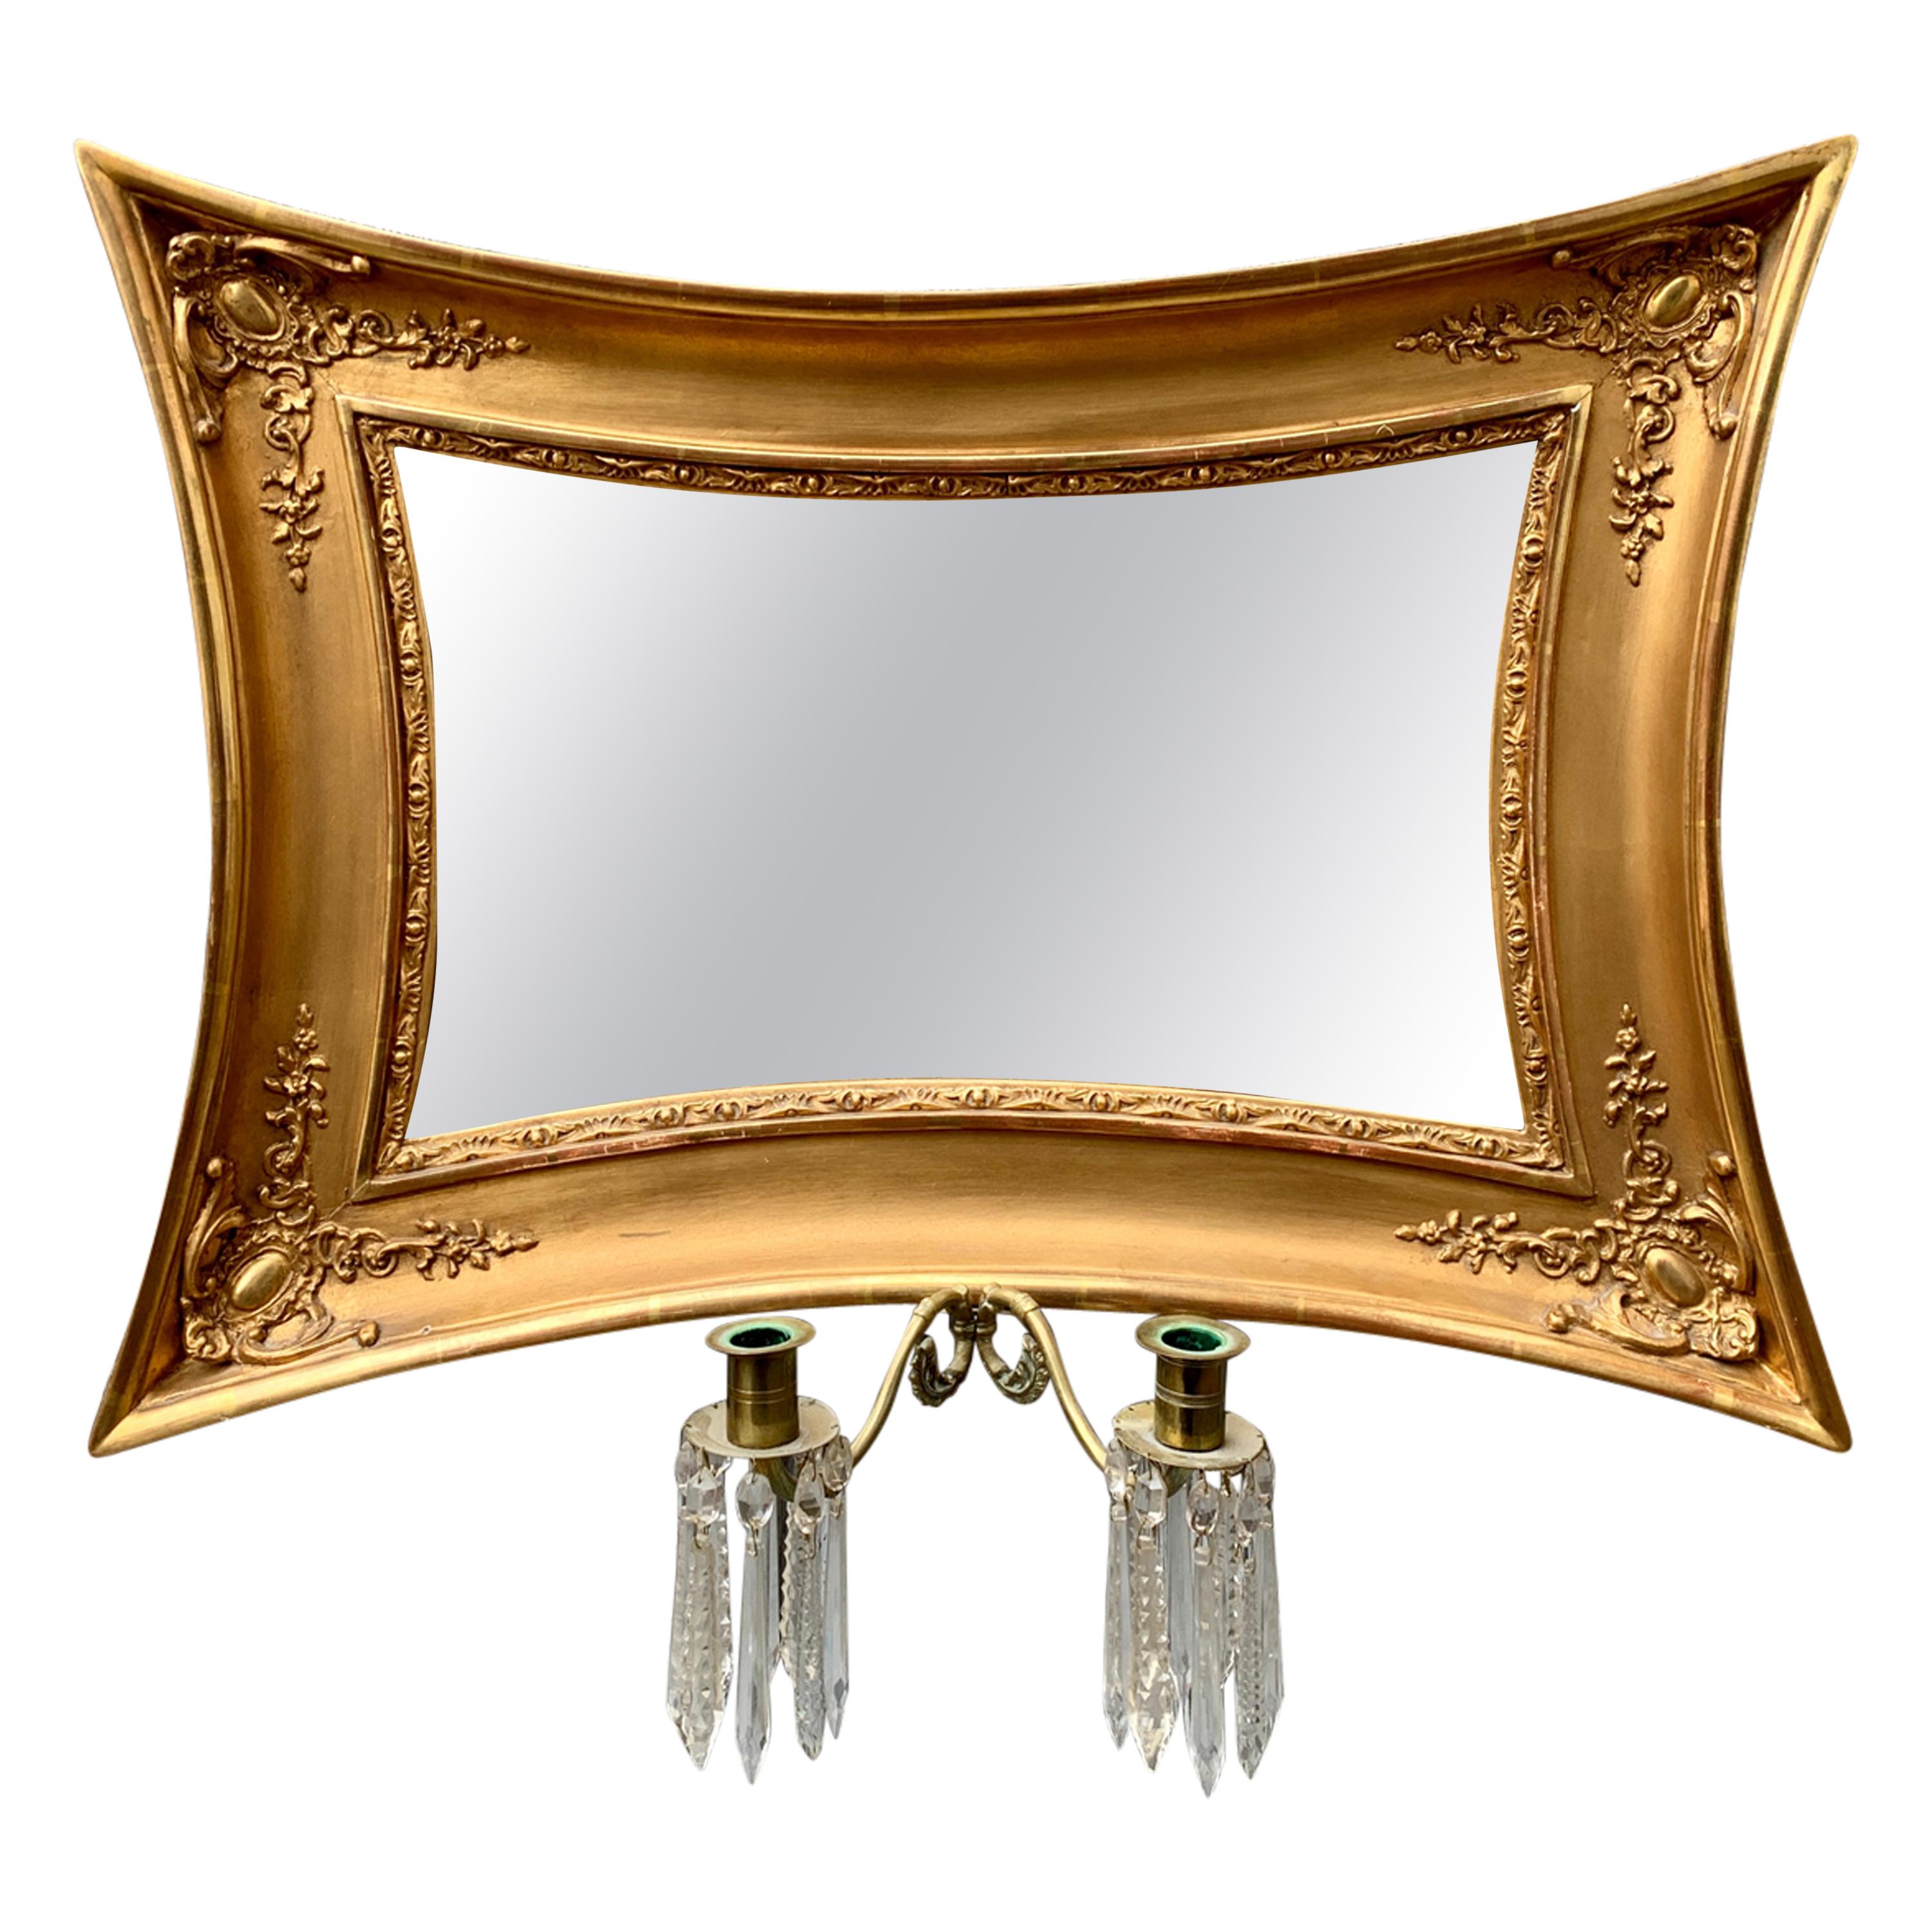 Scandinavian Empire Giltwood Concave Sided Sconce Mirror